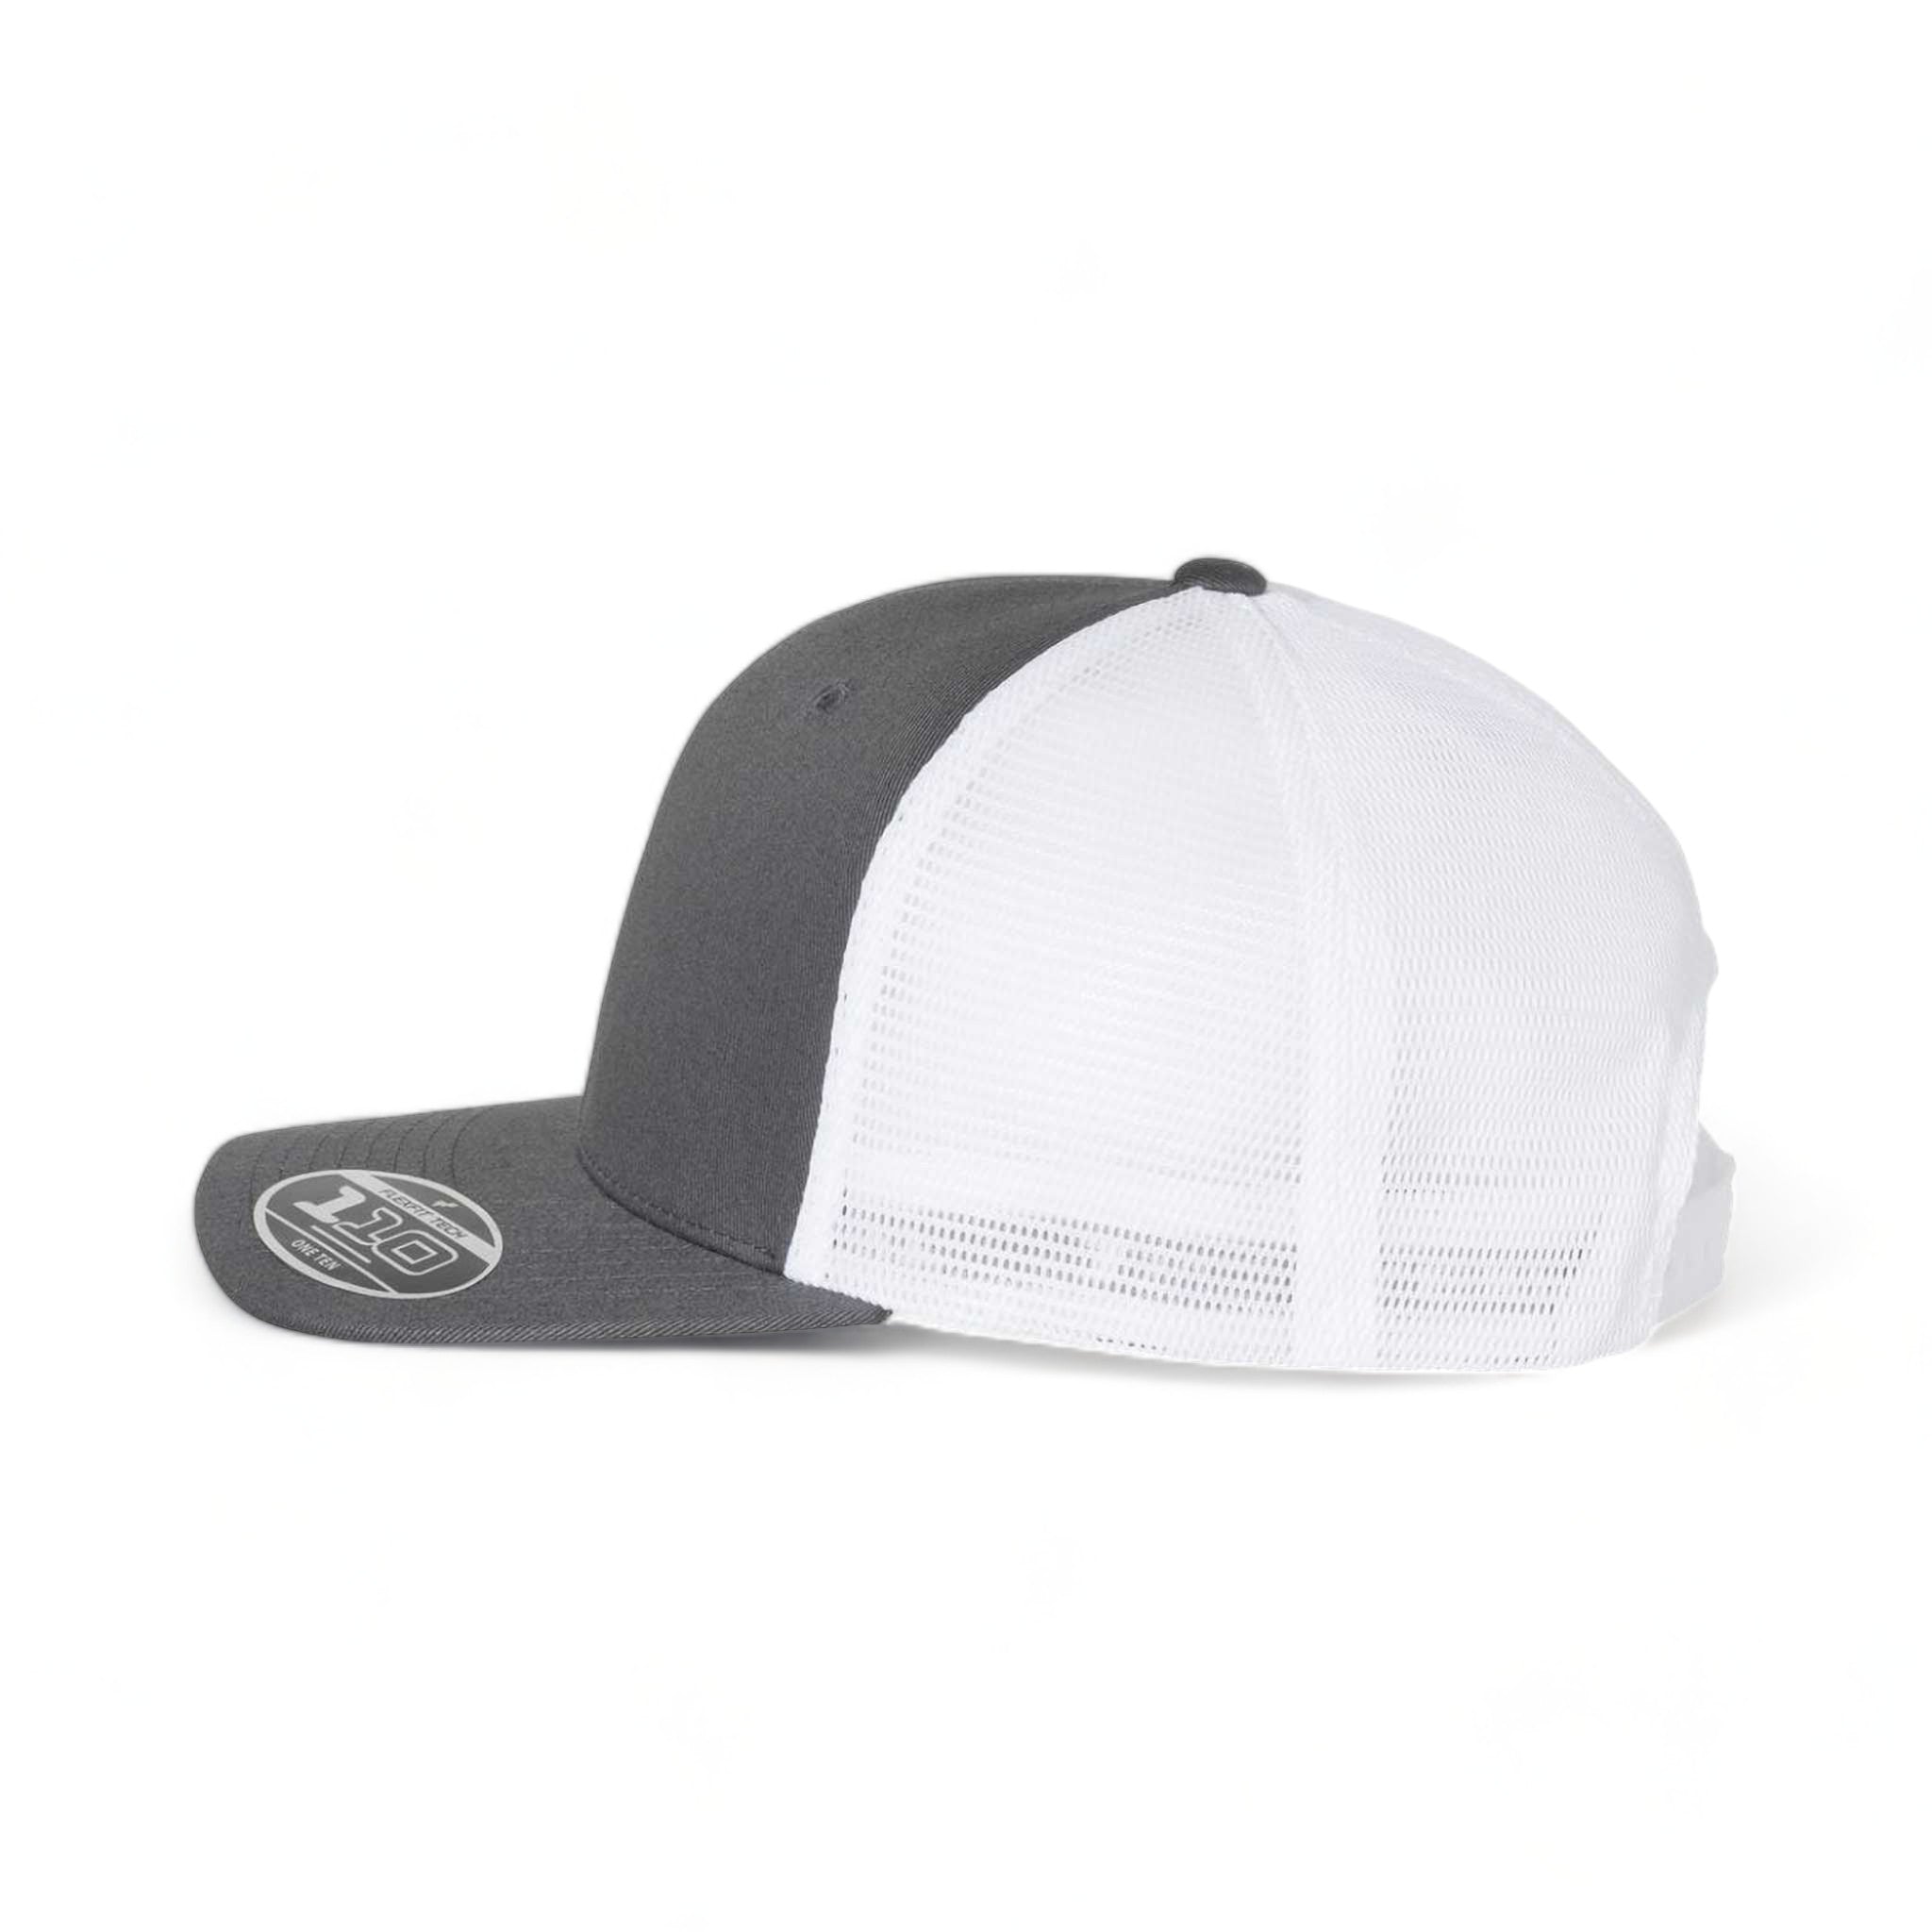 Side view of Flexfit 110M custom hat in charcoal and white